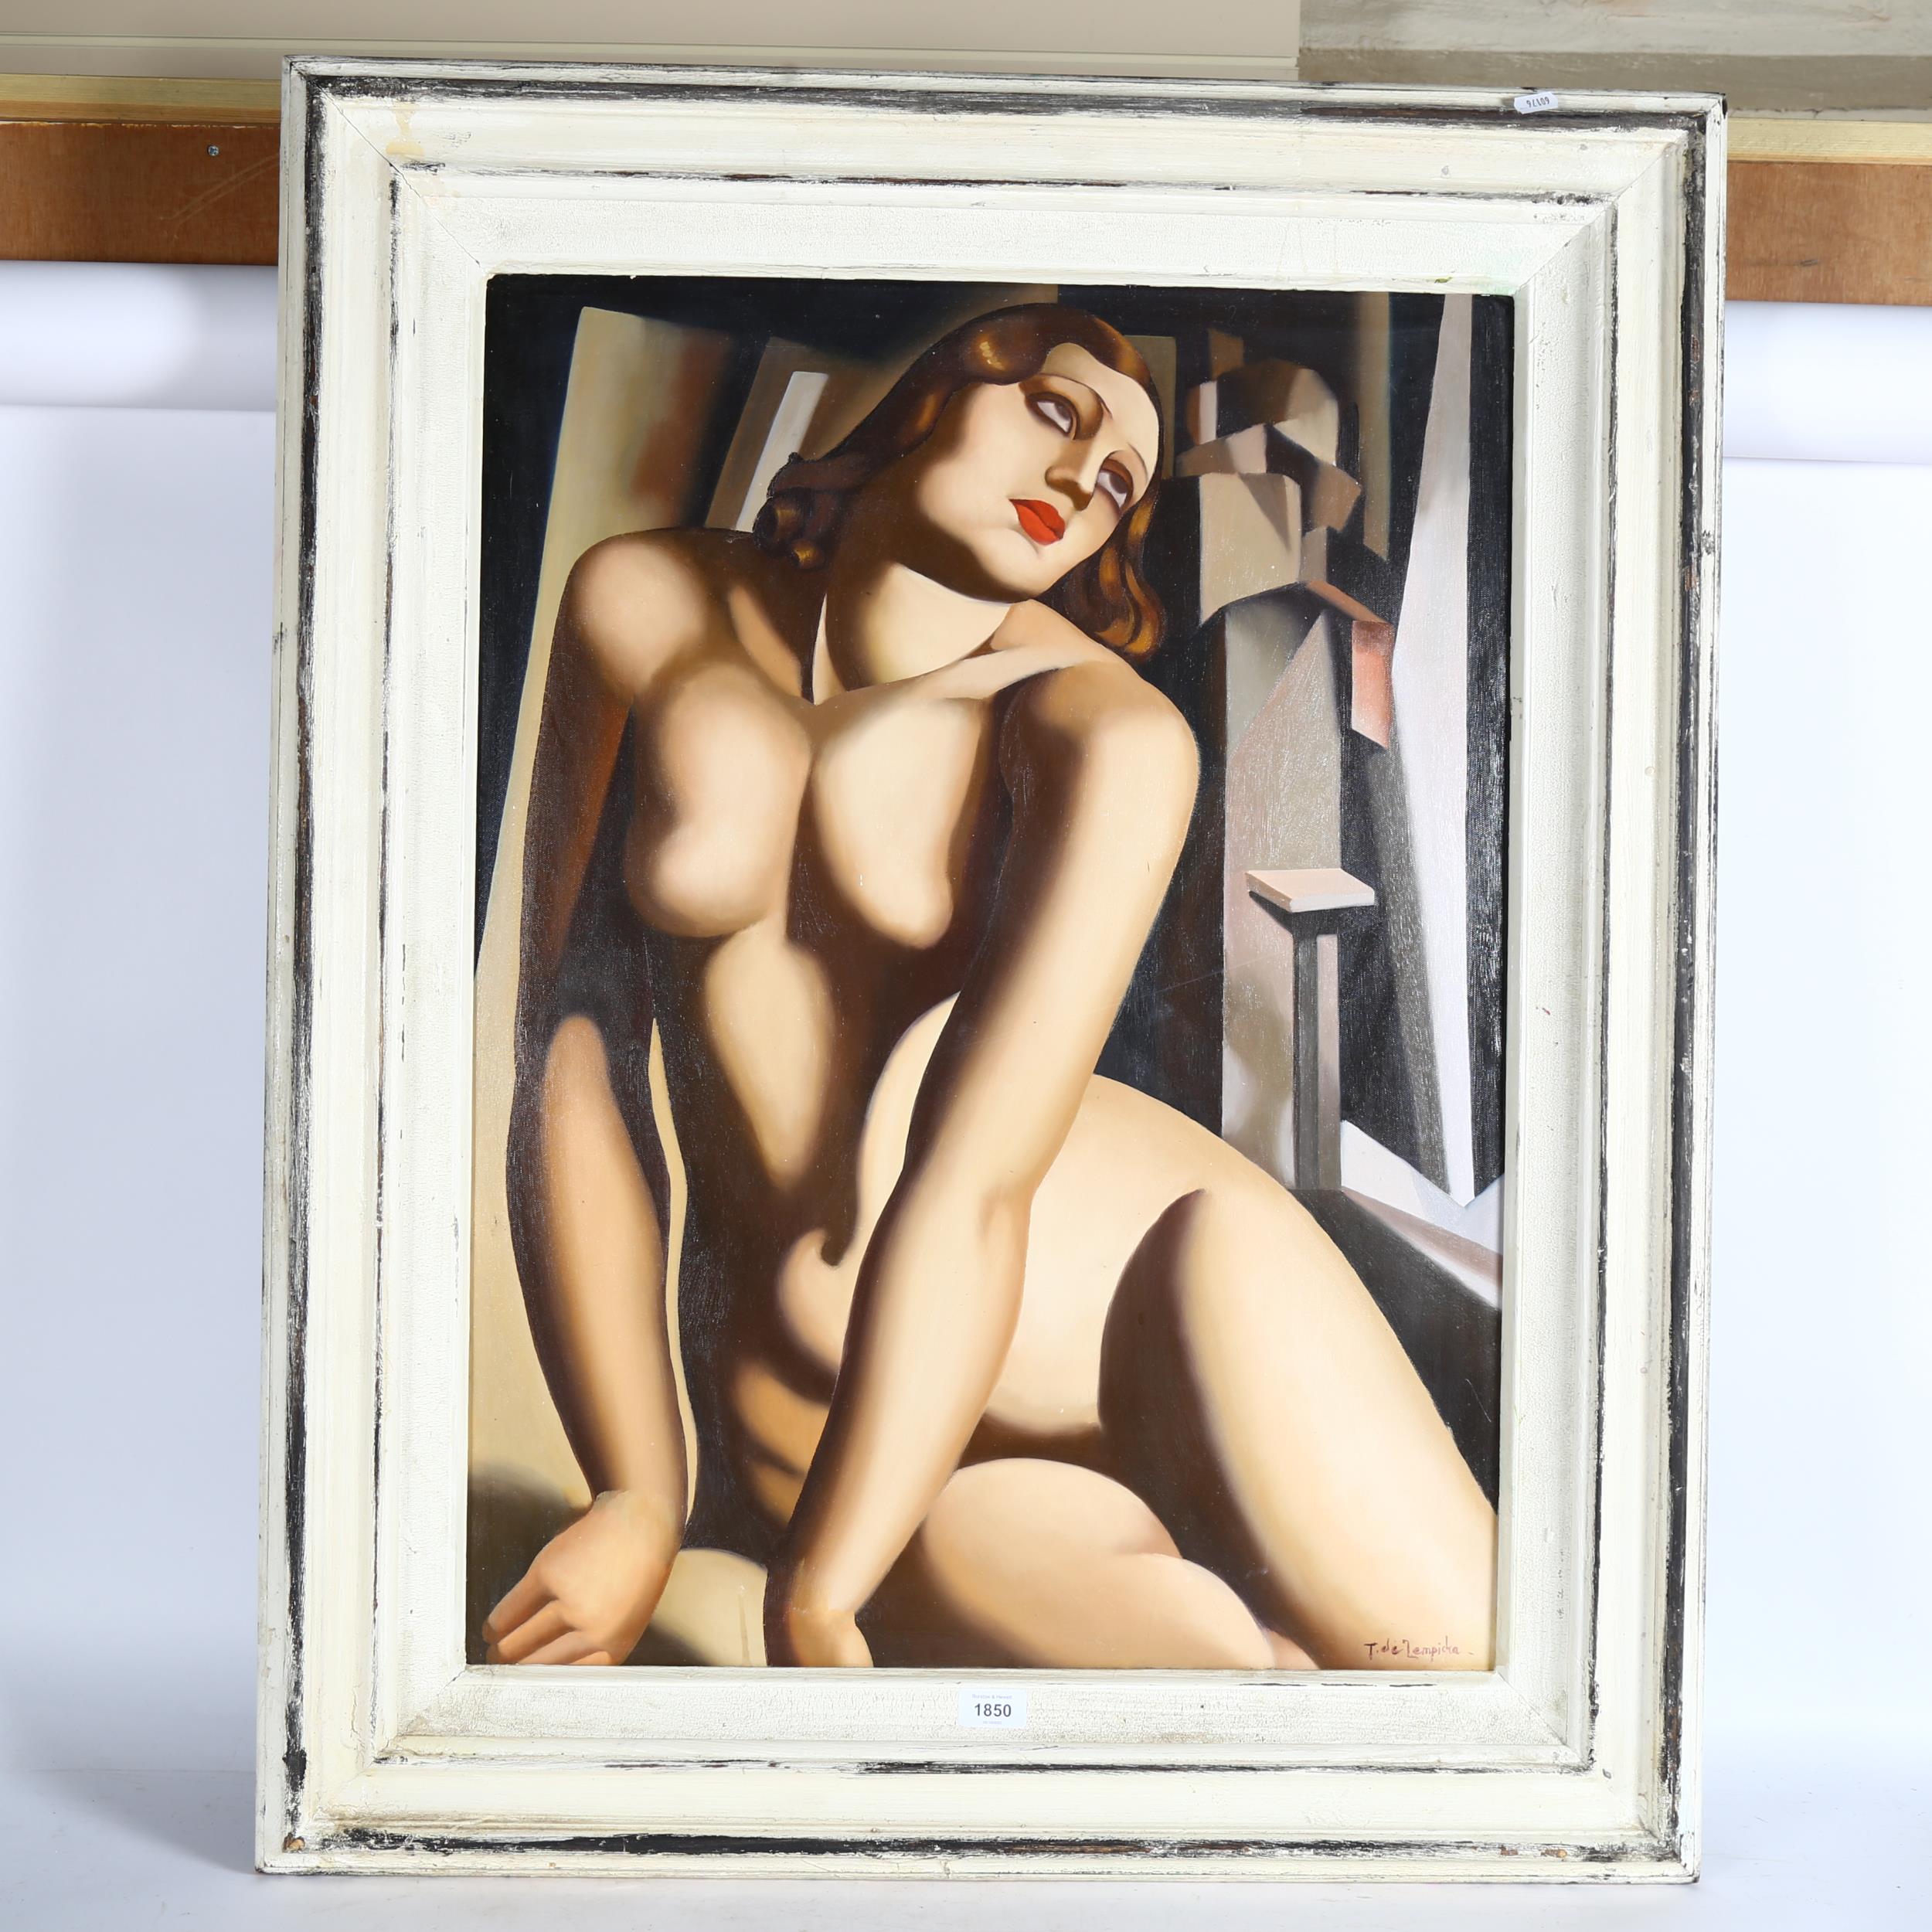 After Tide Lempicta, an Art deco style oil on board, still life study of a nude lady, 100cm x 80cm